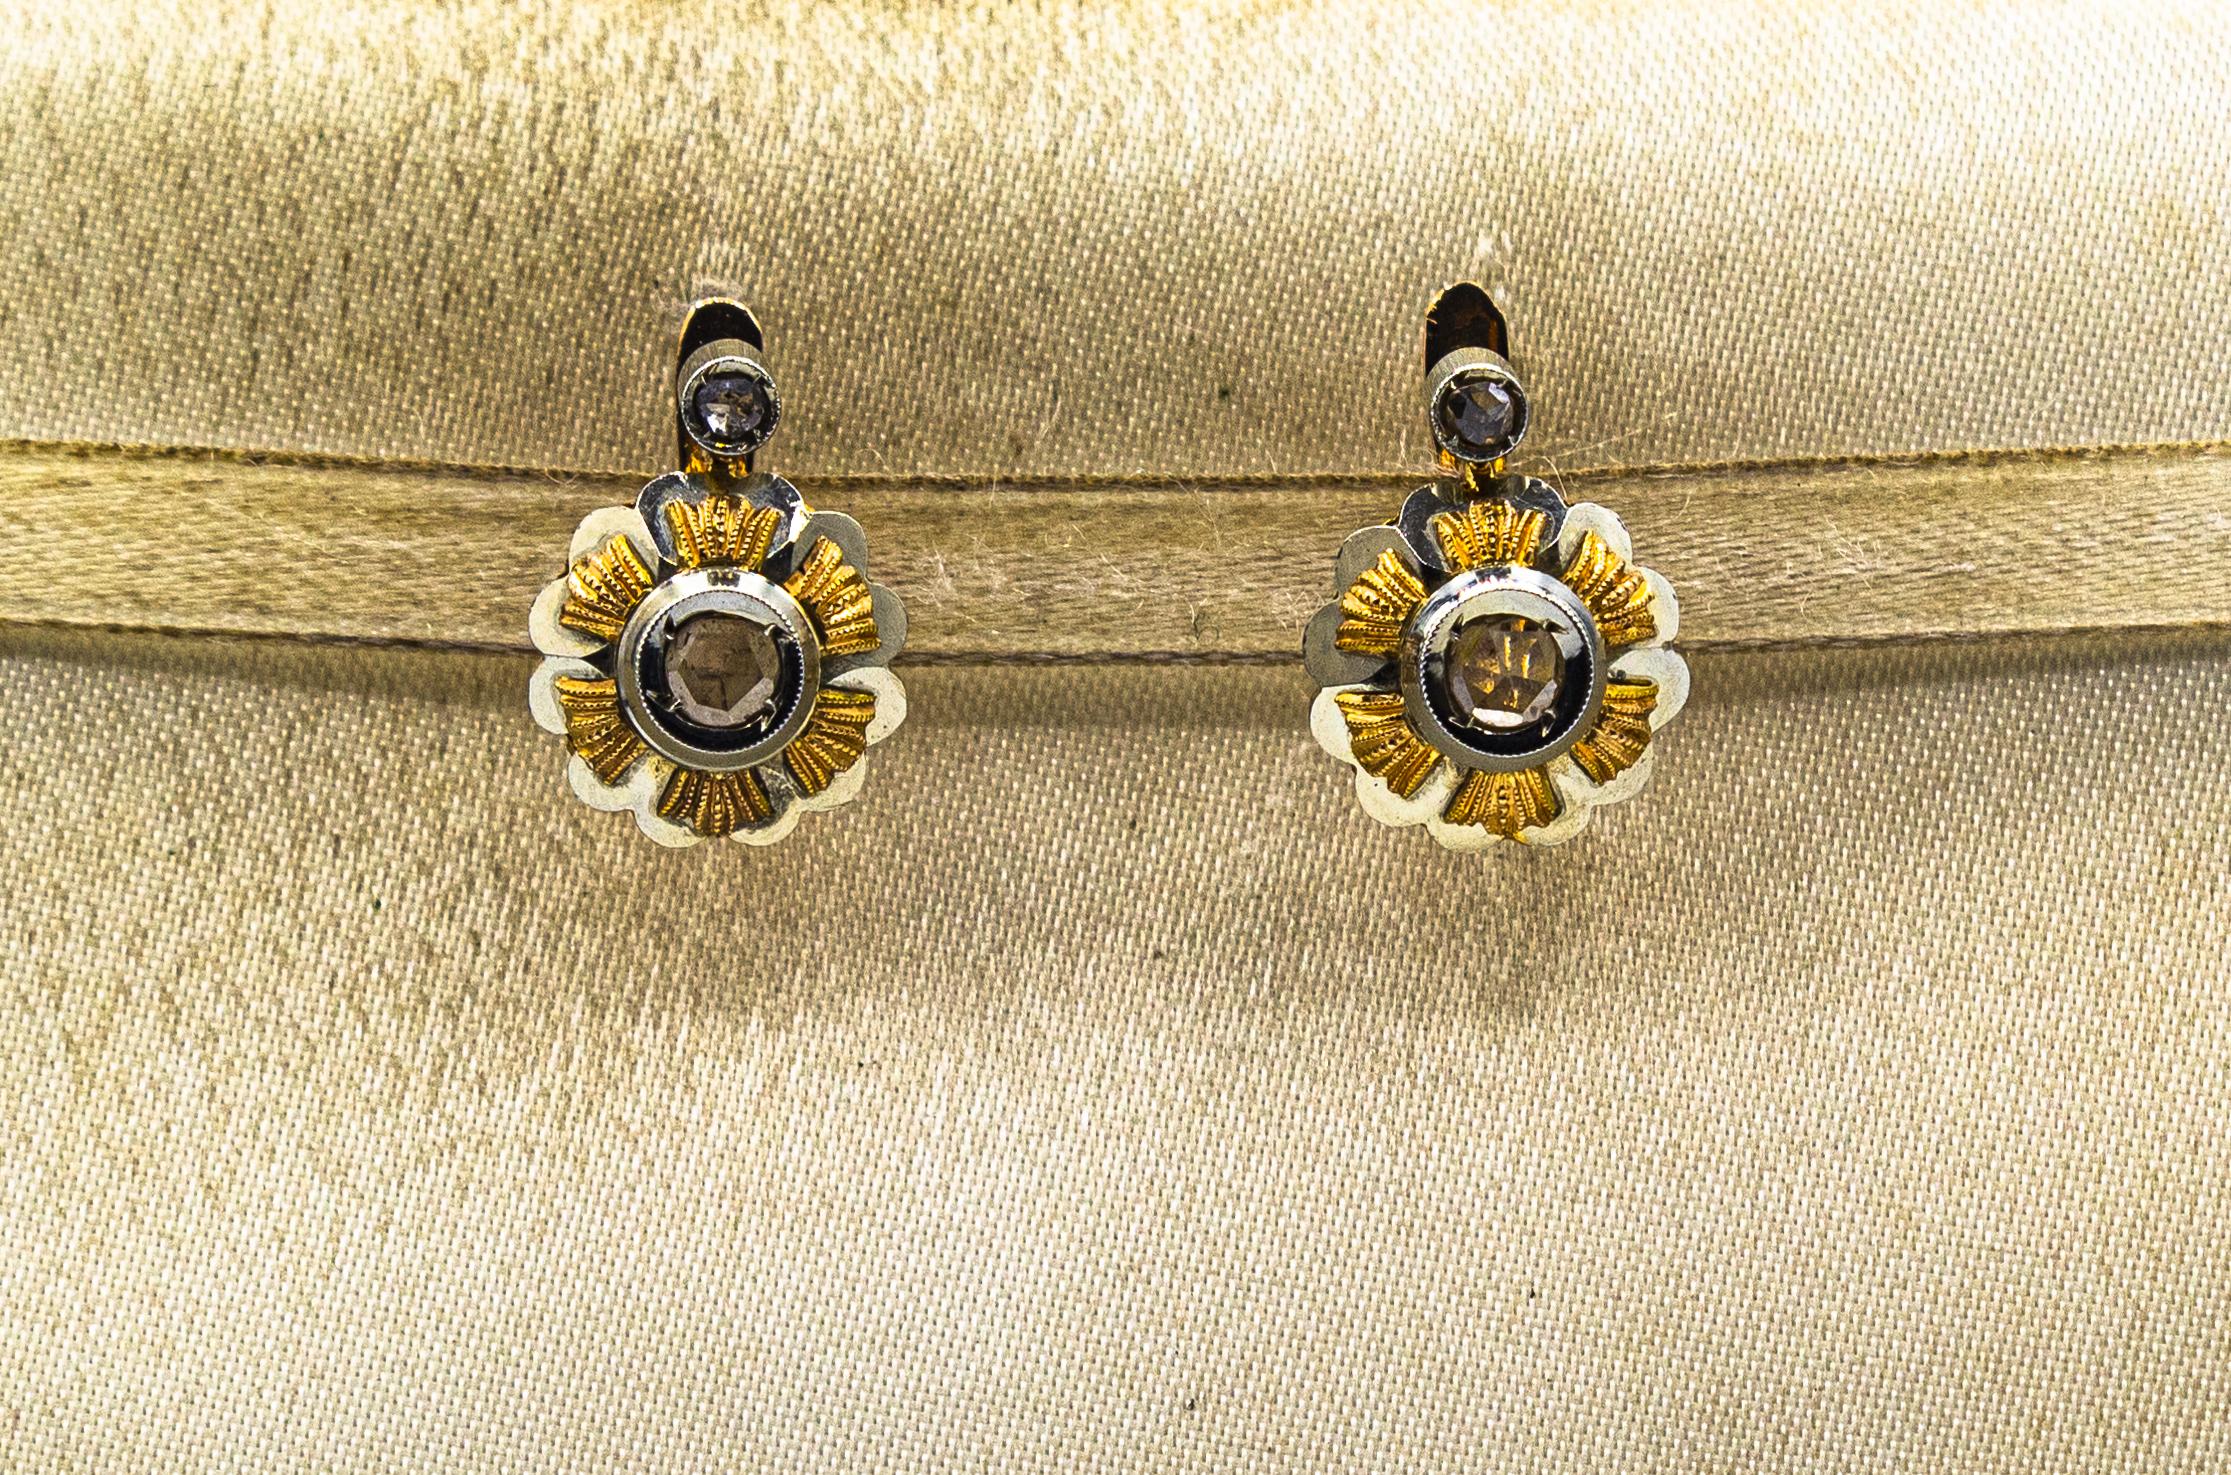 These Earrings are made of 18K Yellow Gold and 18K White Gold.
These Earrings have 0.40 Carats of White Rose Cut Diamonds.
These Earrings are inspired by Art Deco.

All our Earrings have pins for pierced ears but we can change the closure and make